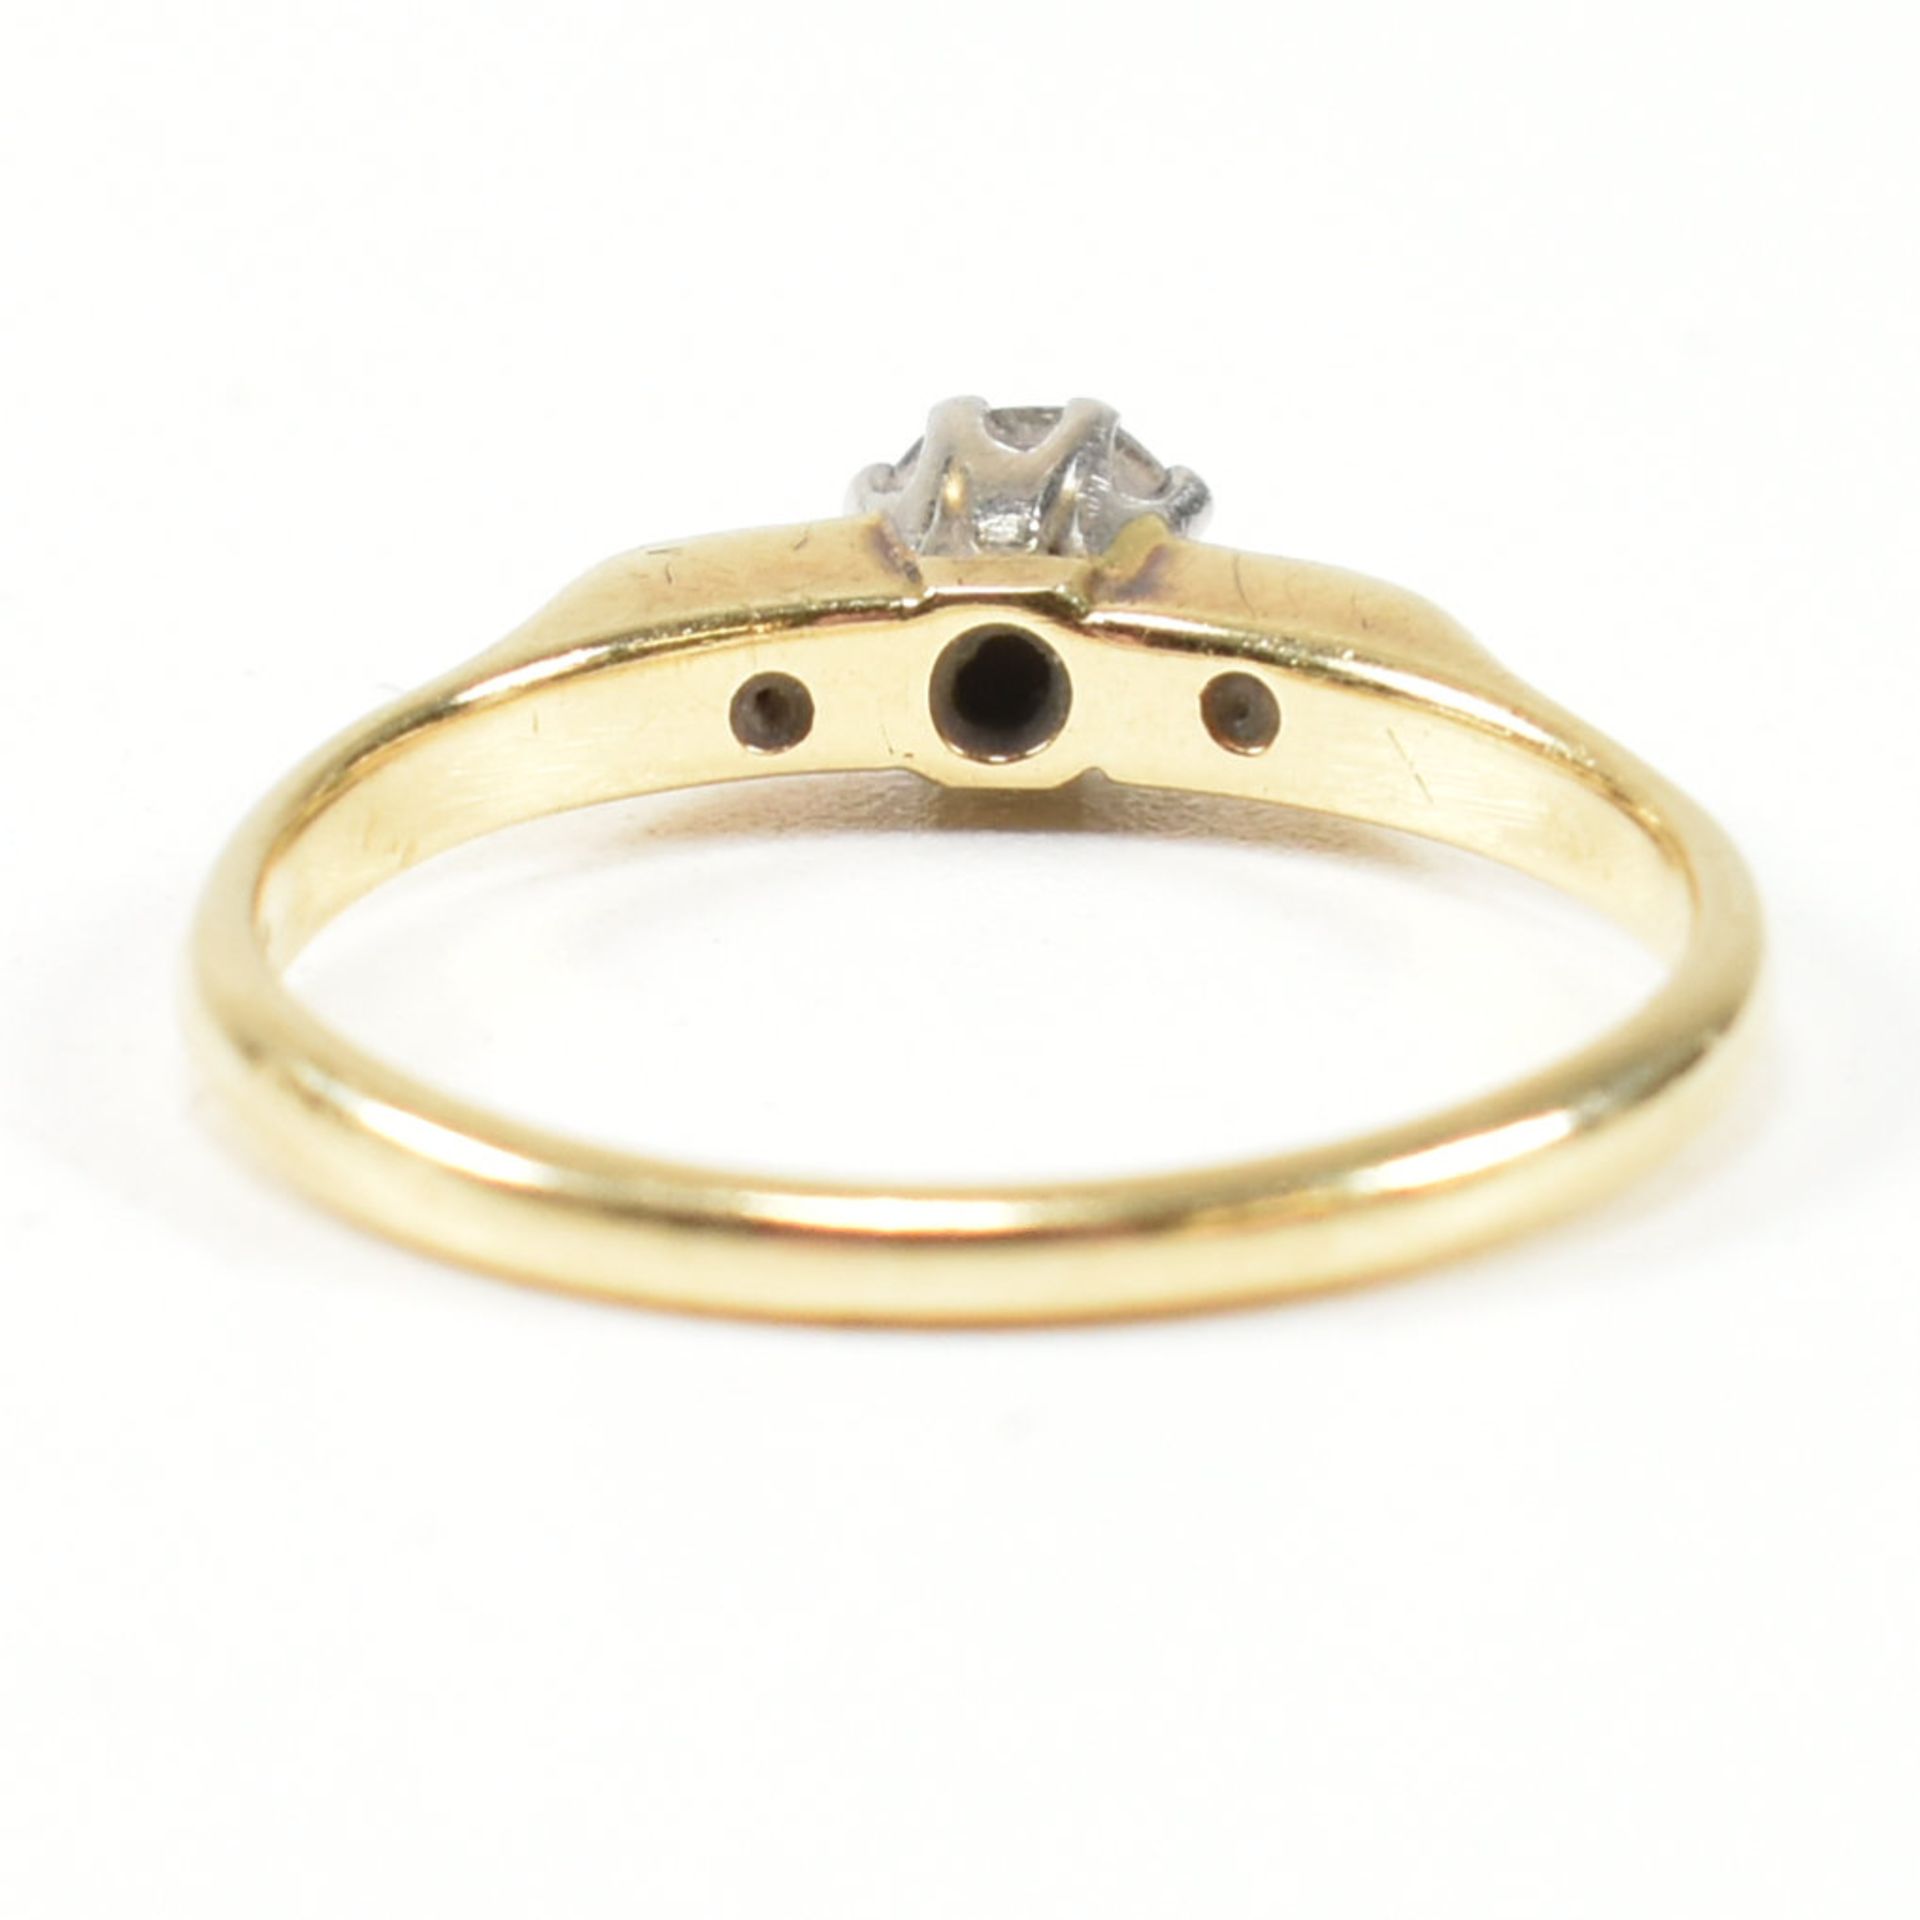 18CT GOLD & DIAMOND SOLITAIRE RING - Image 5 of 8